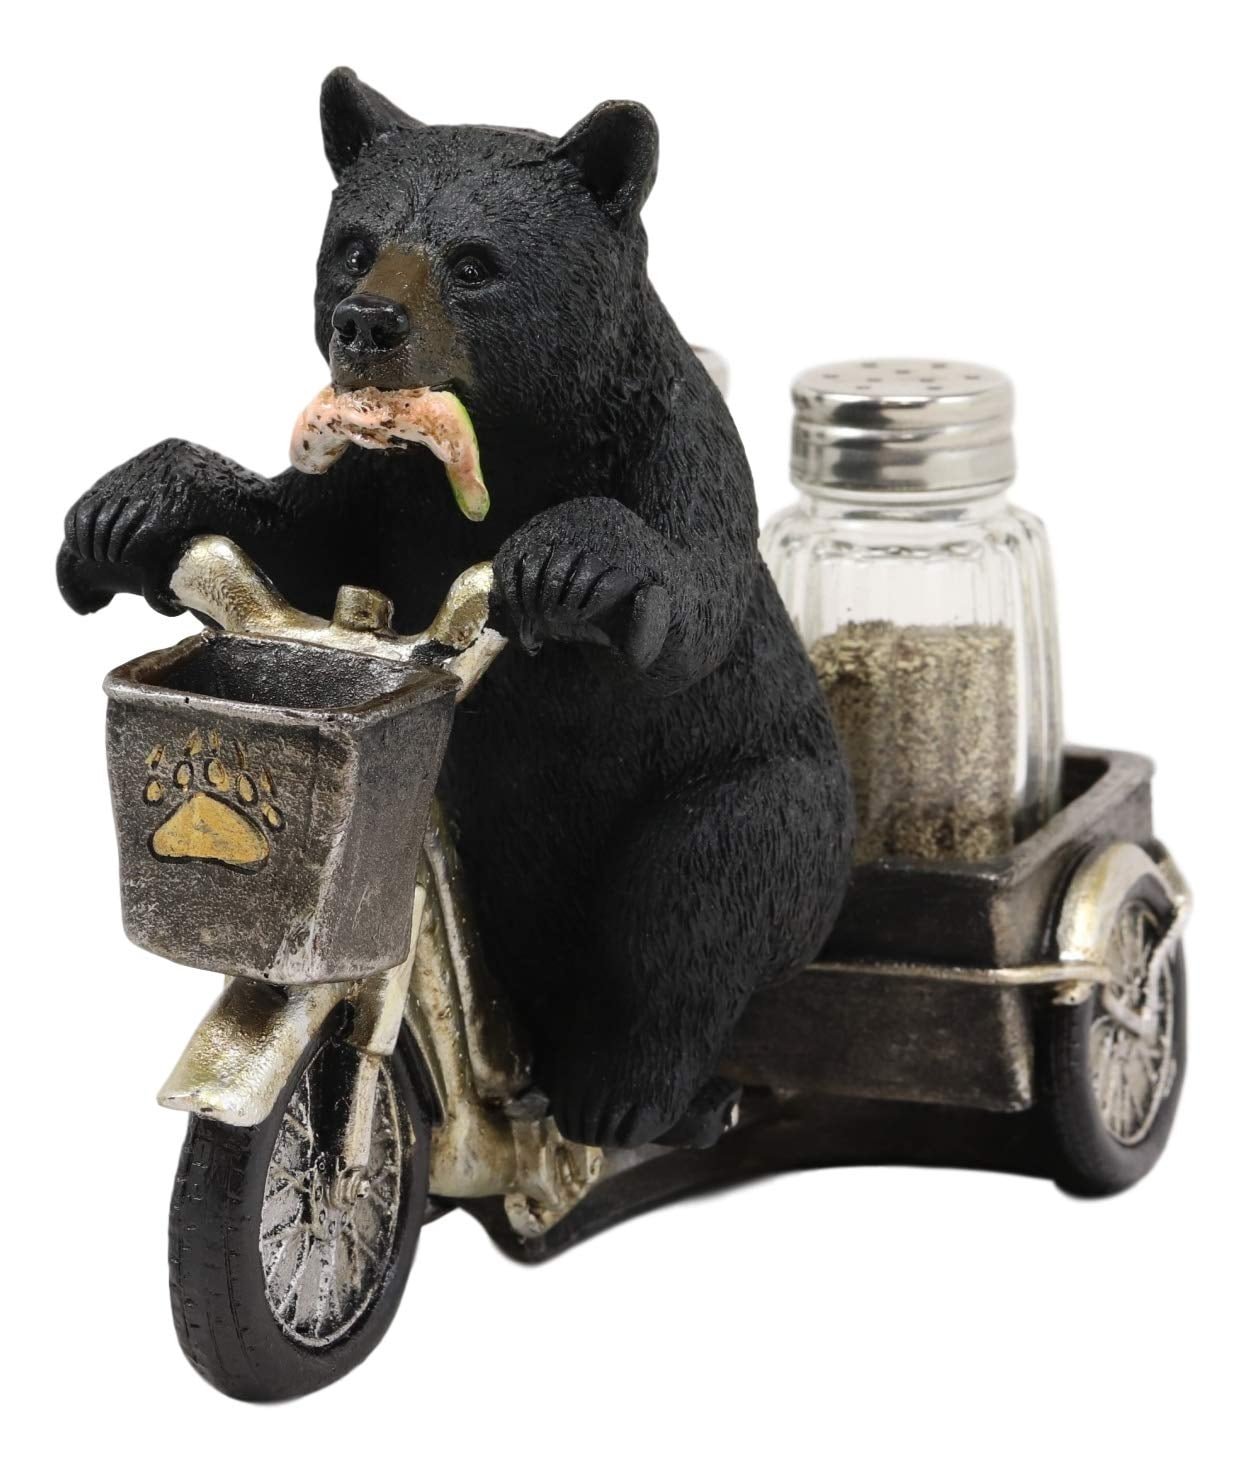 Bear on a Tricycle Salt and Pepper Shaker Holder 